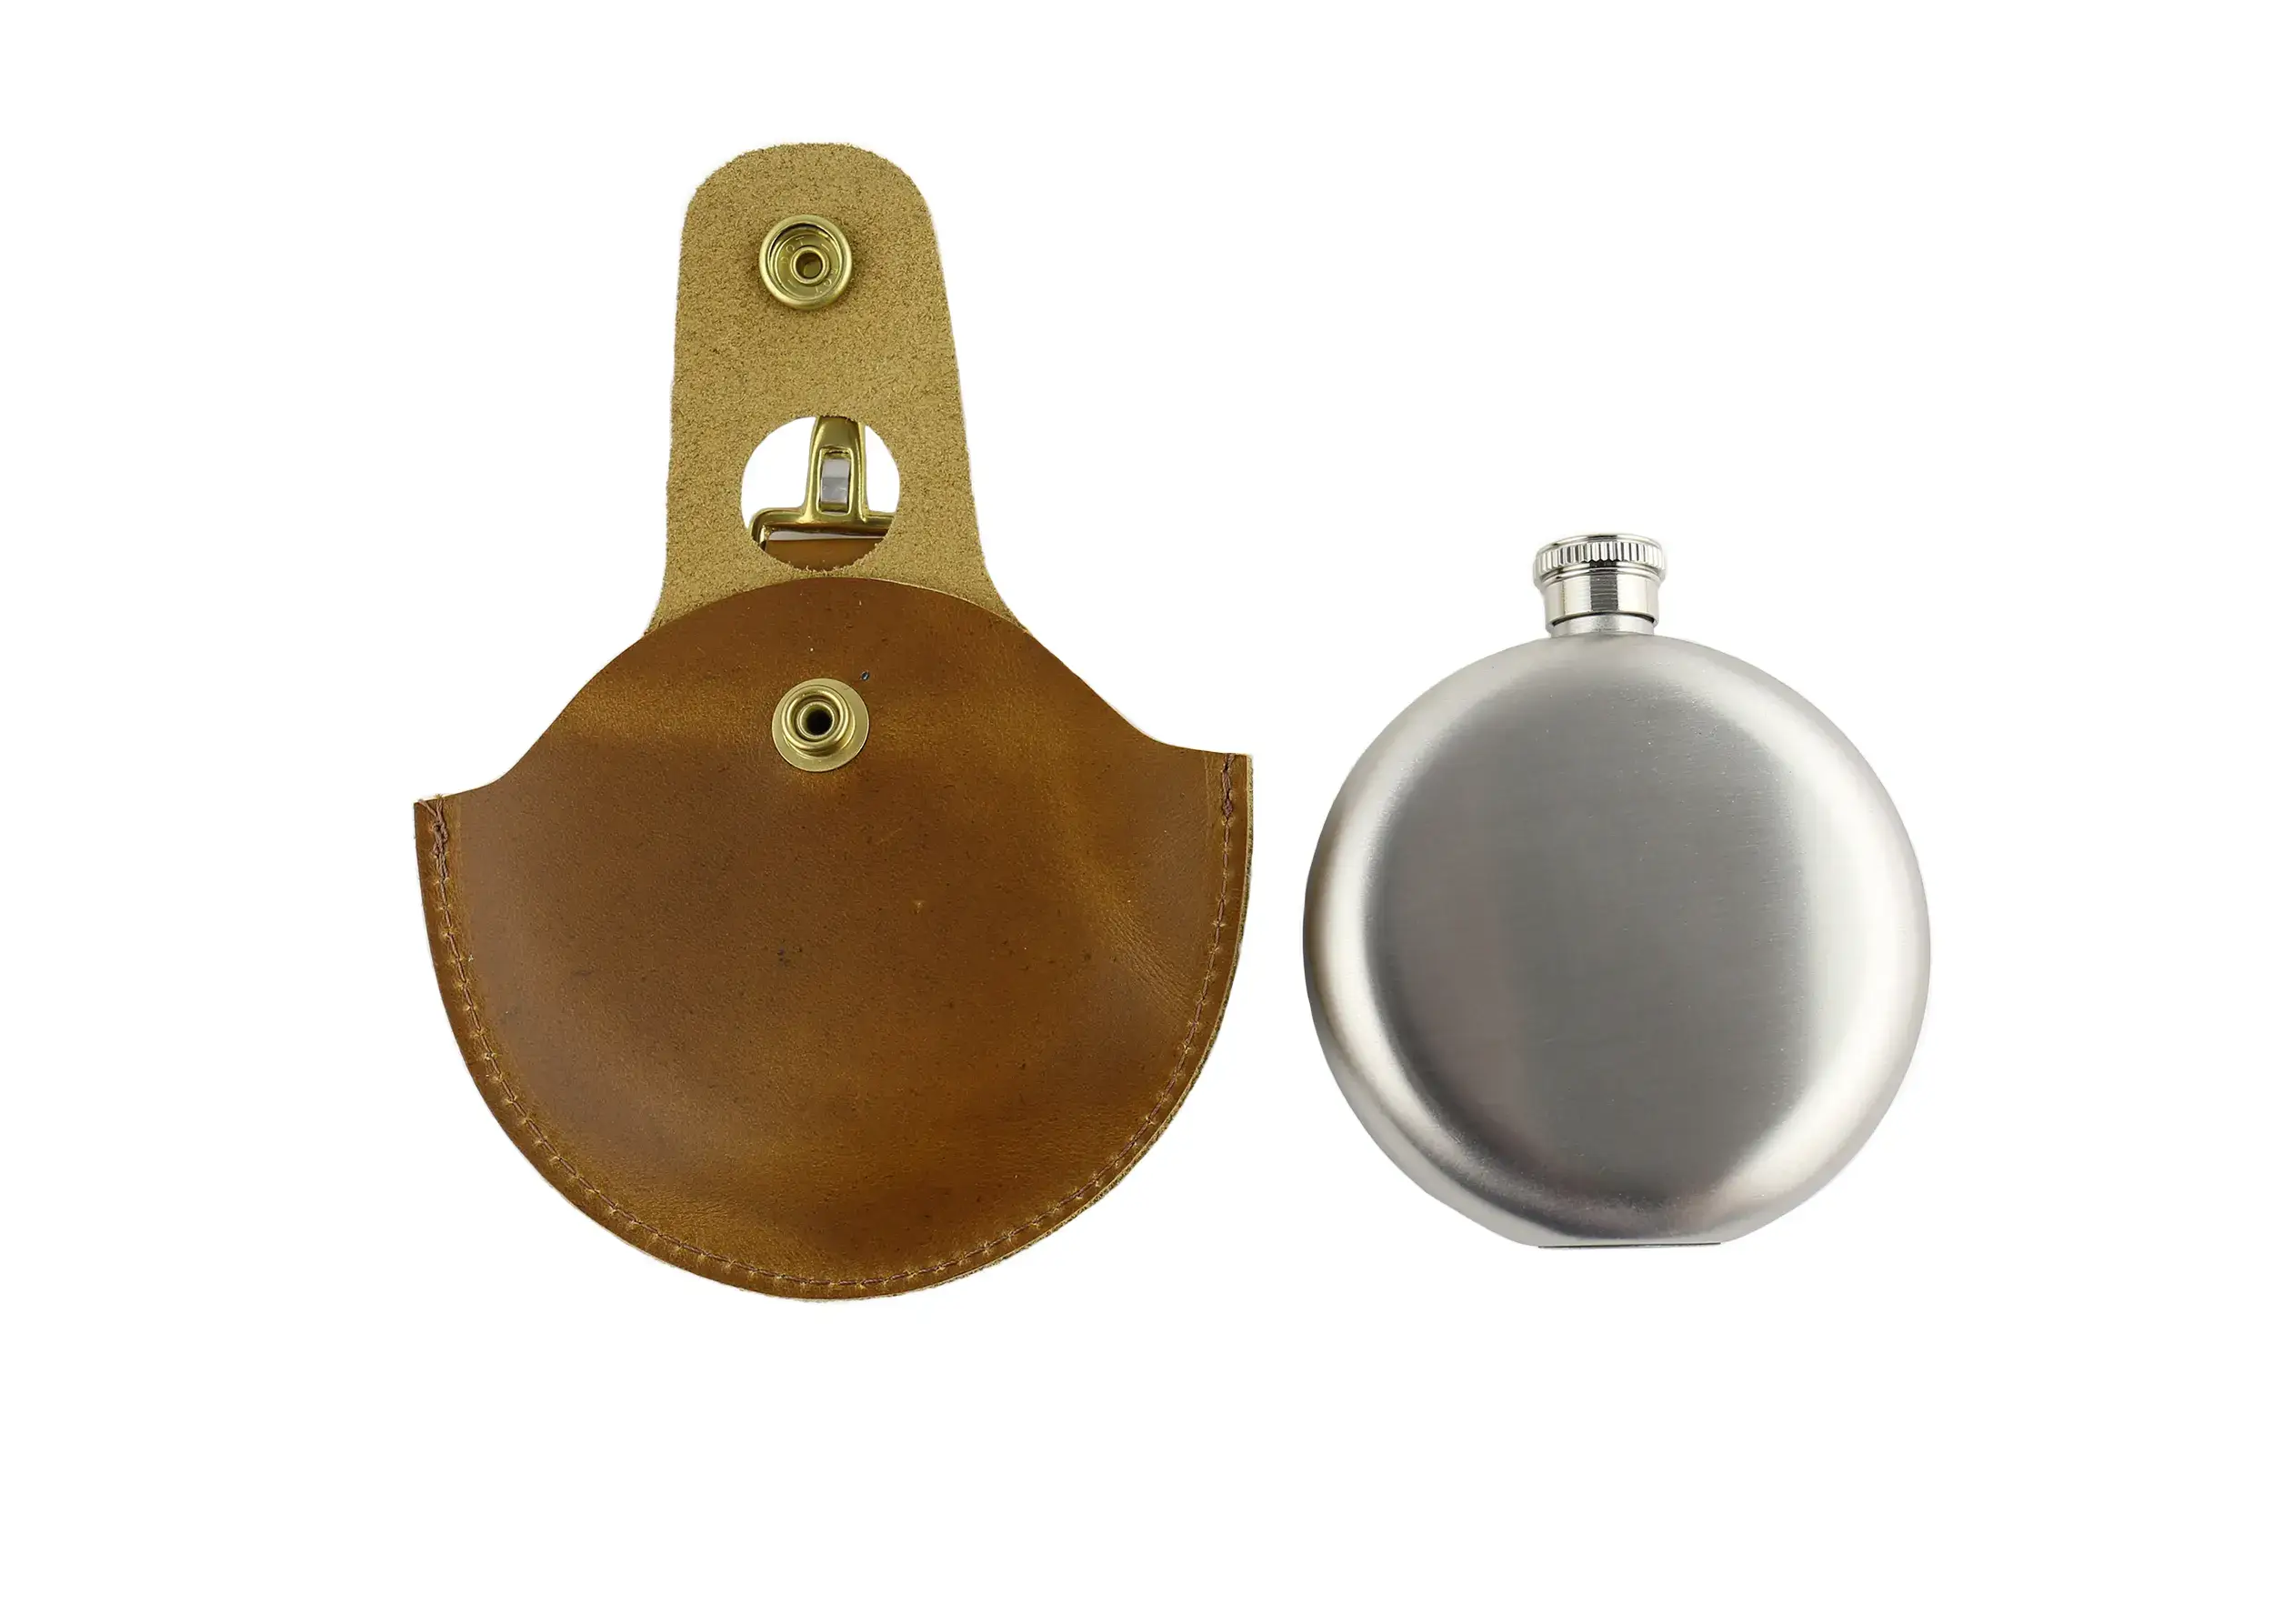 https://ravenswoodleather.com/wp-content/uploads/2023/02/empty-with-flask.webp